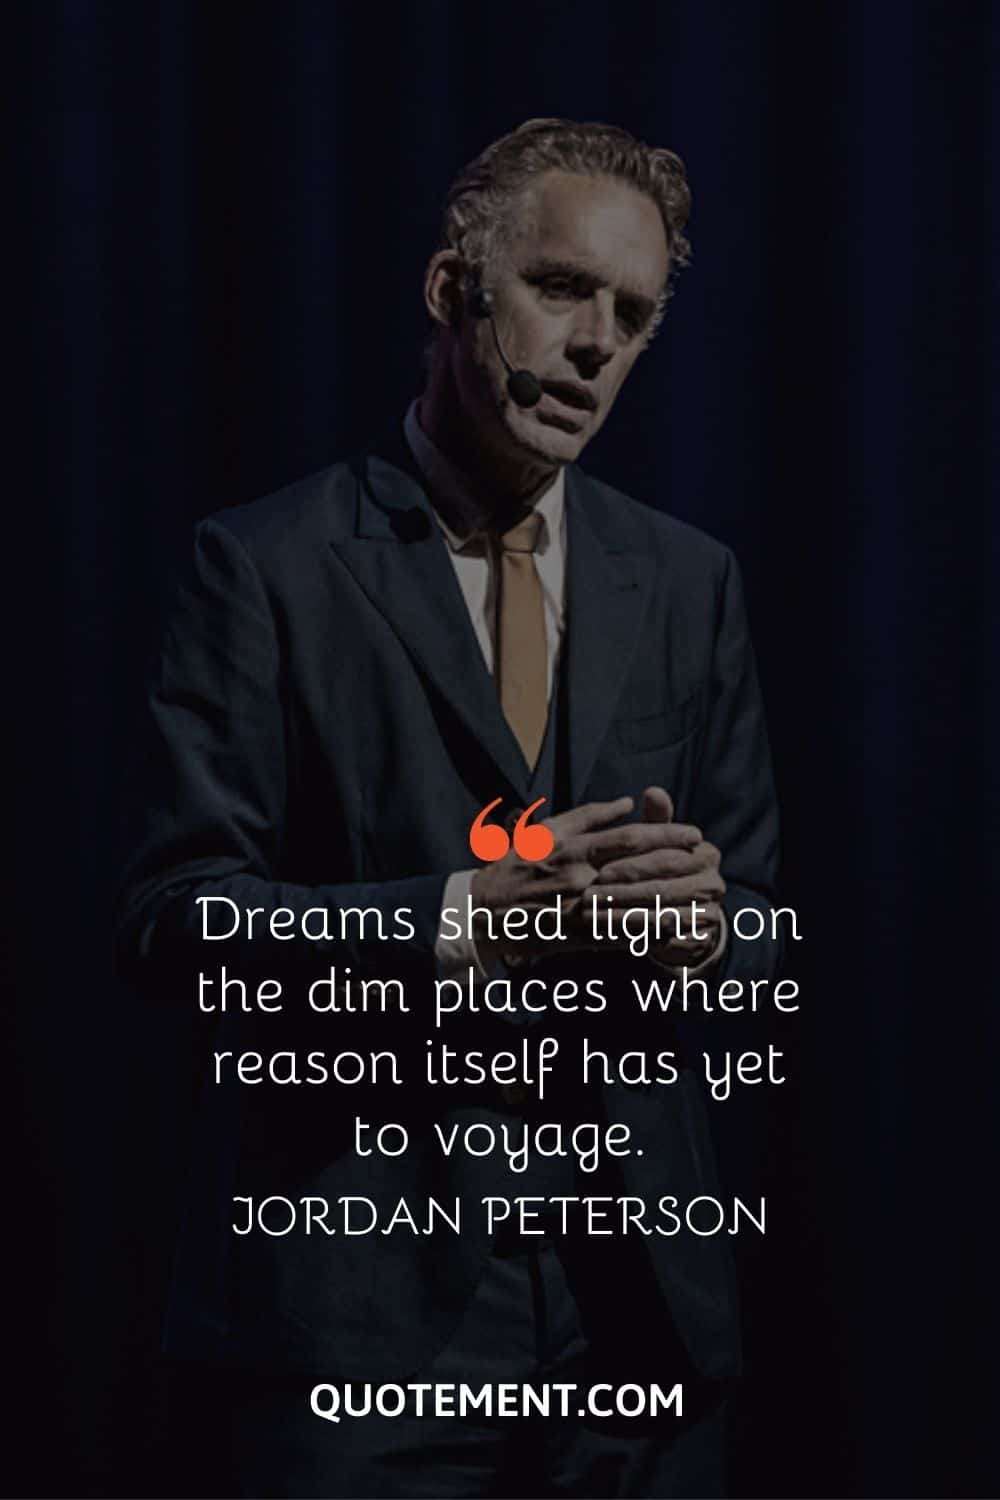 “Dreams shed light on the dim places where reason itself has yet to voyage.” — Jordan Peterson